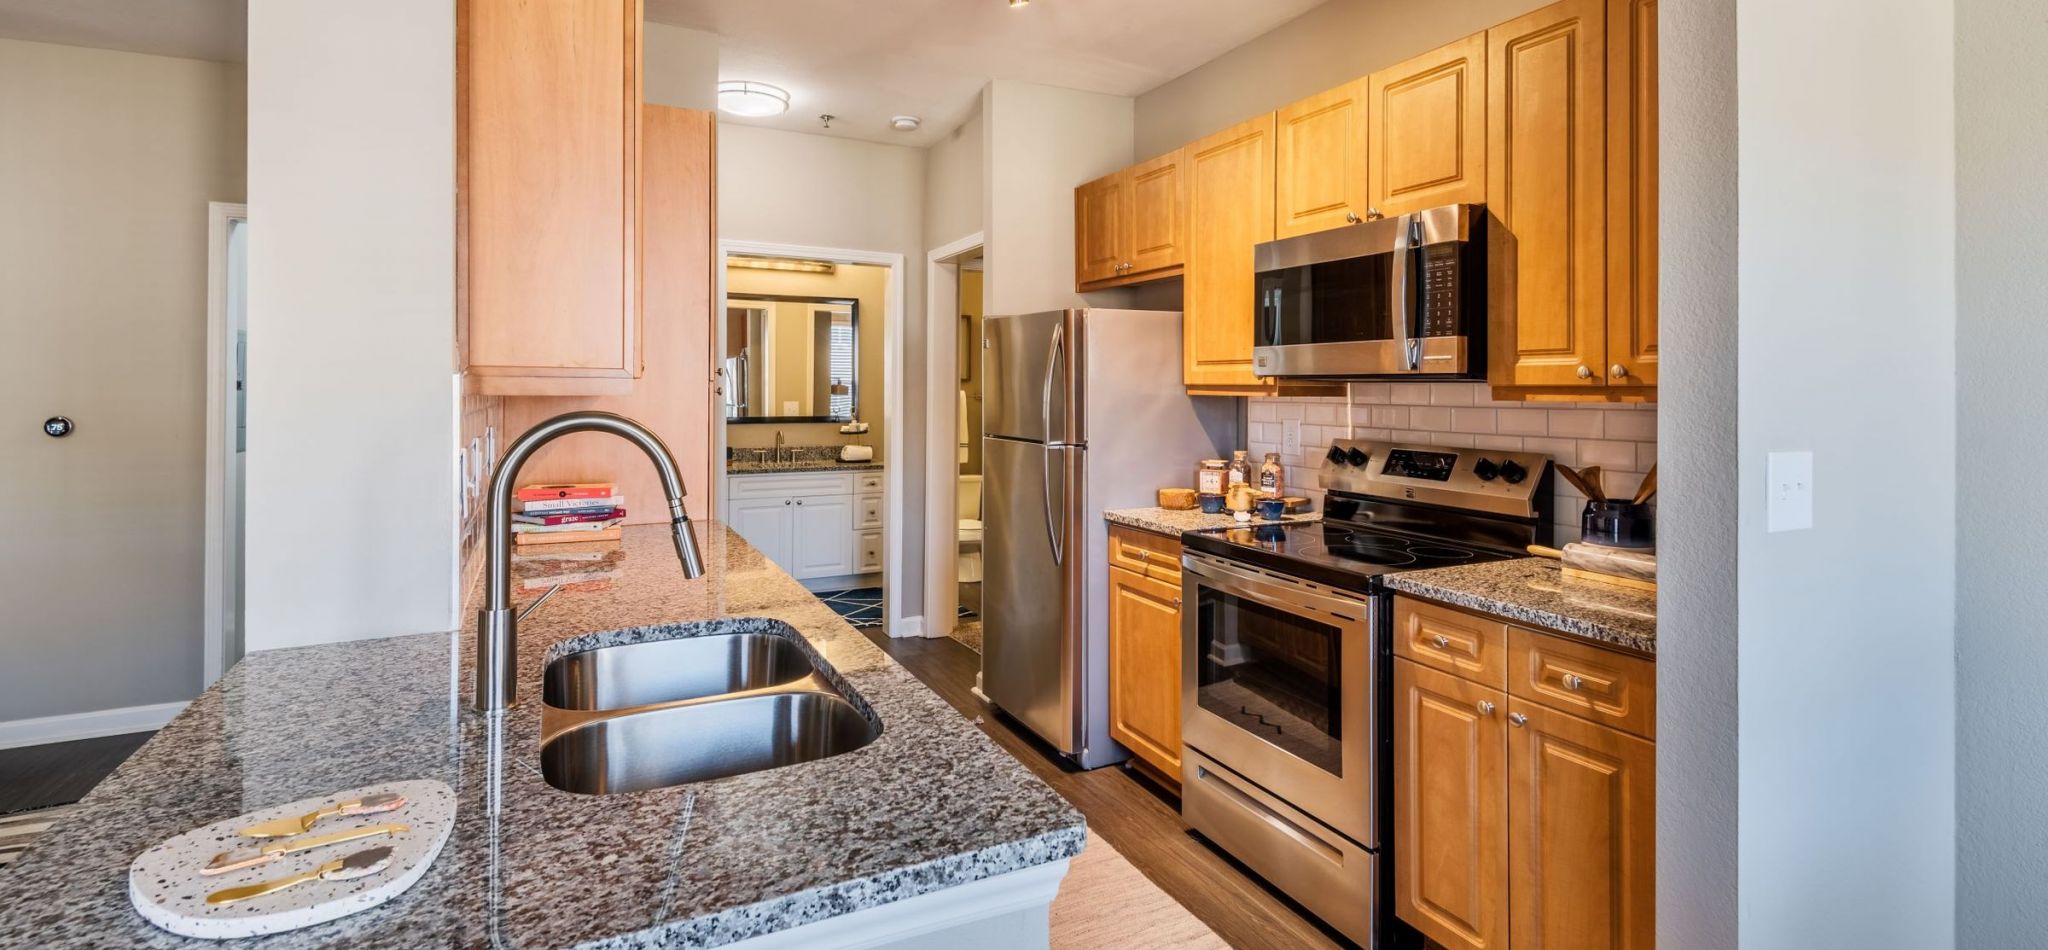 Hawthorne Davis Park apartment kitchen with wood floor and stainless steel appliances